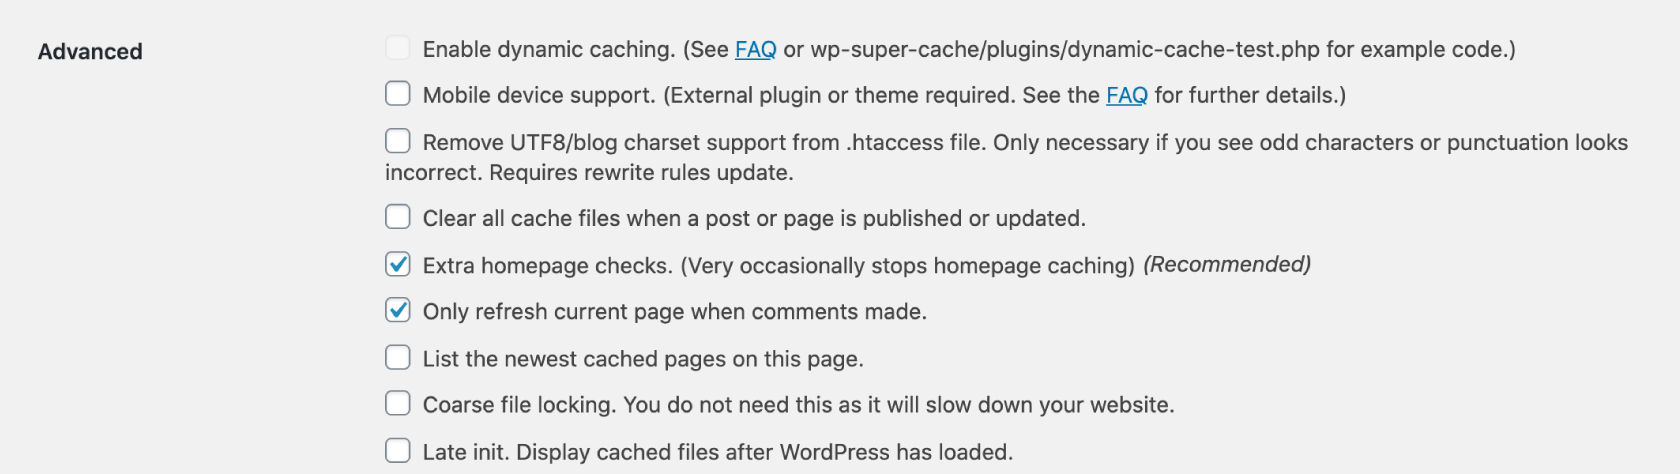 WP Super Cache recommended Advanced settings